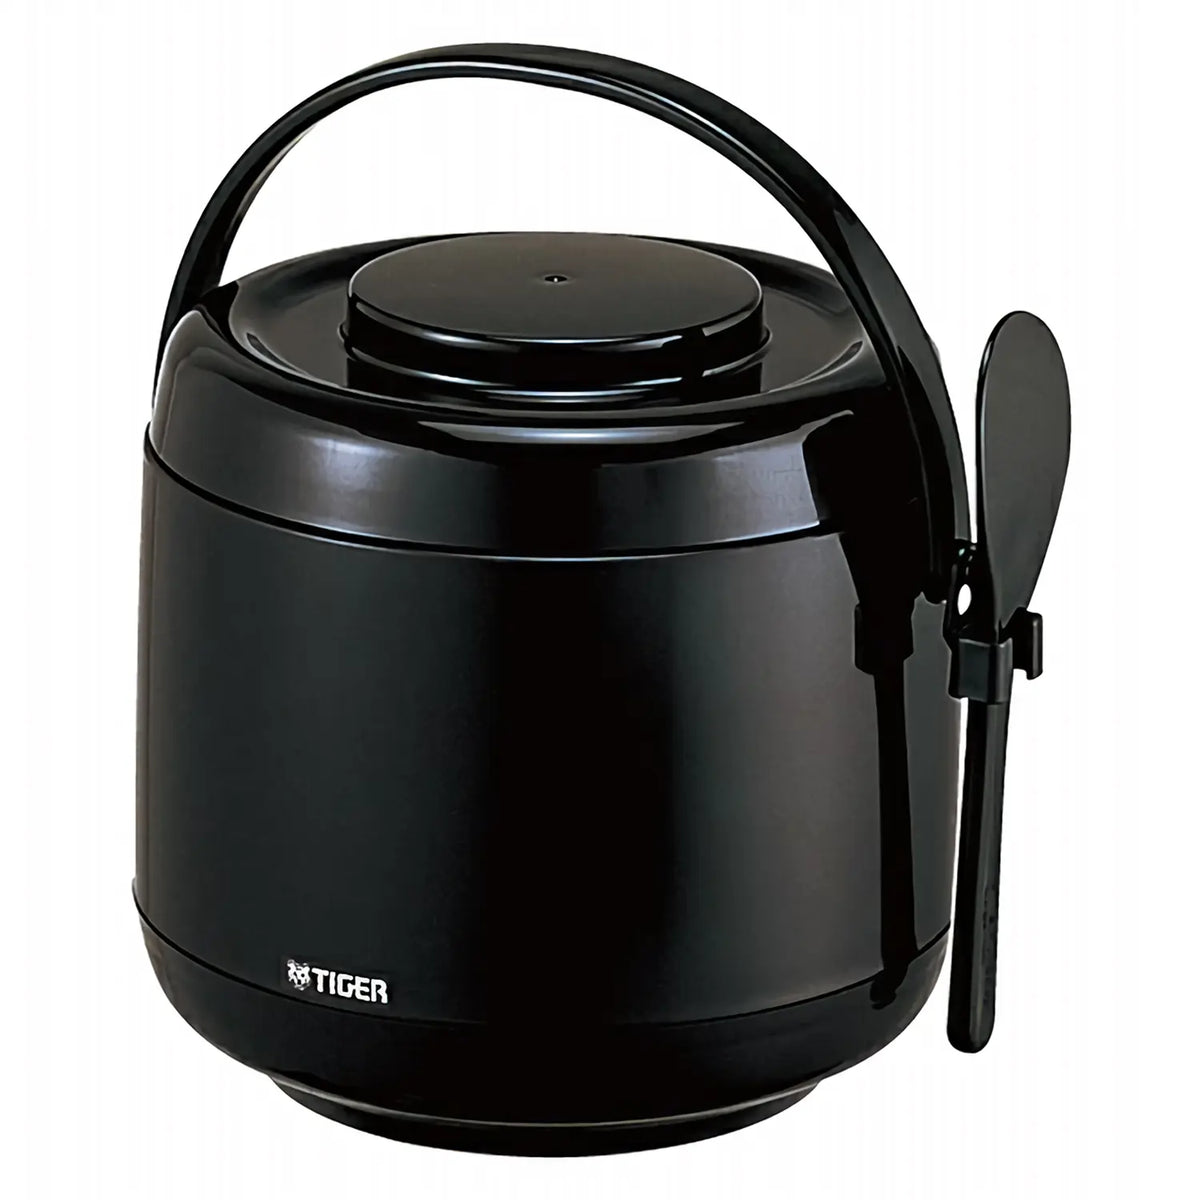 Tiger Non-Electric Thermal Cooker Review